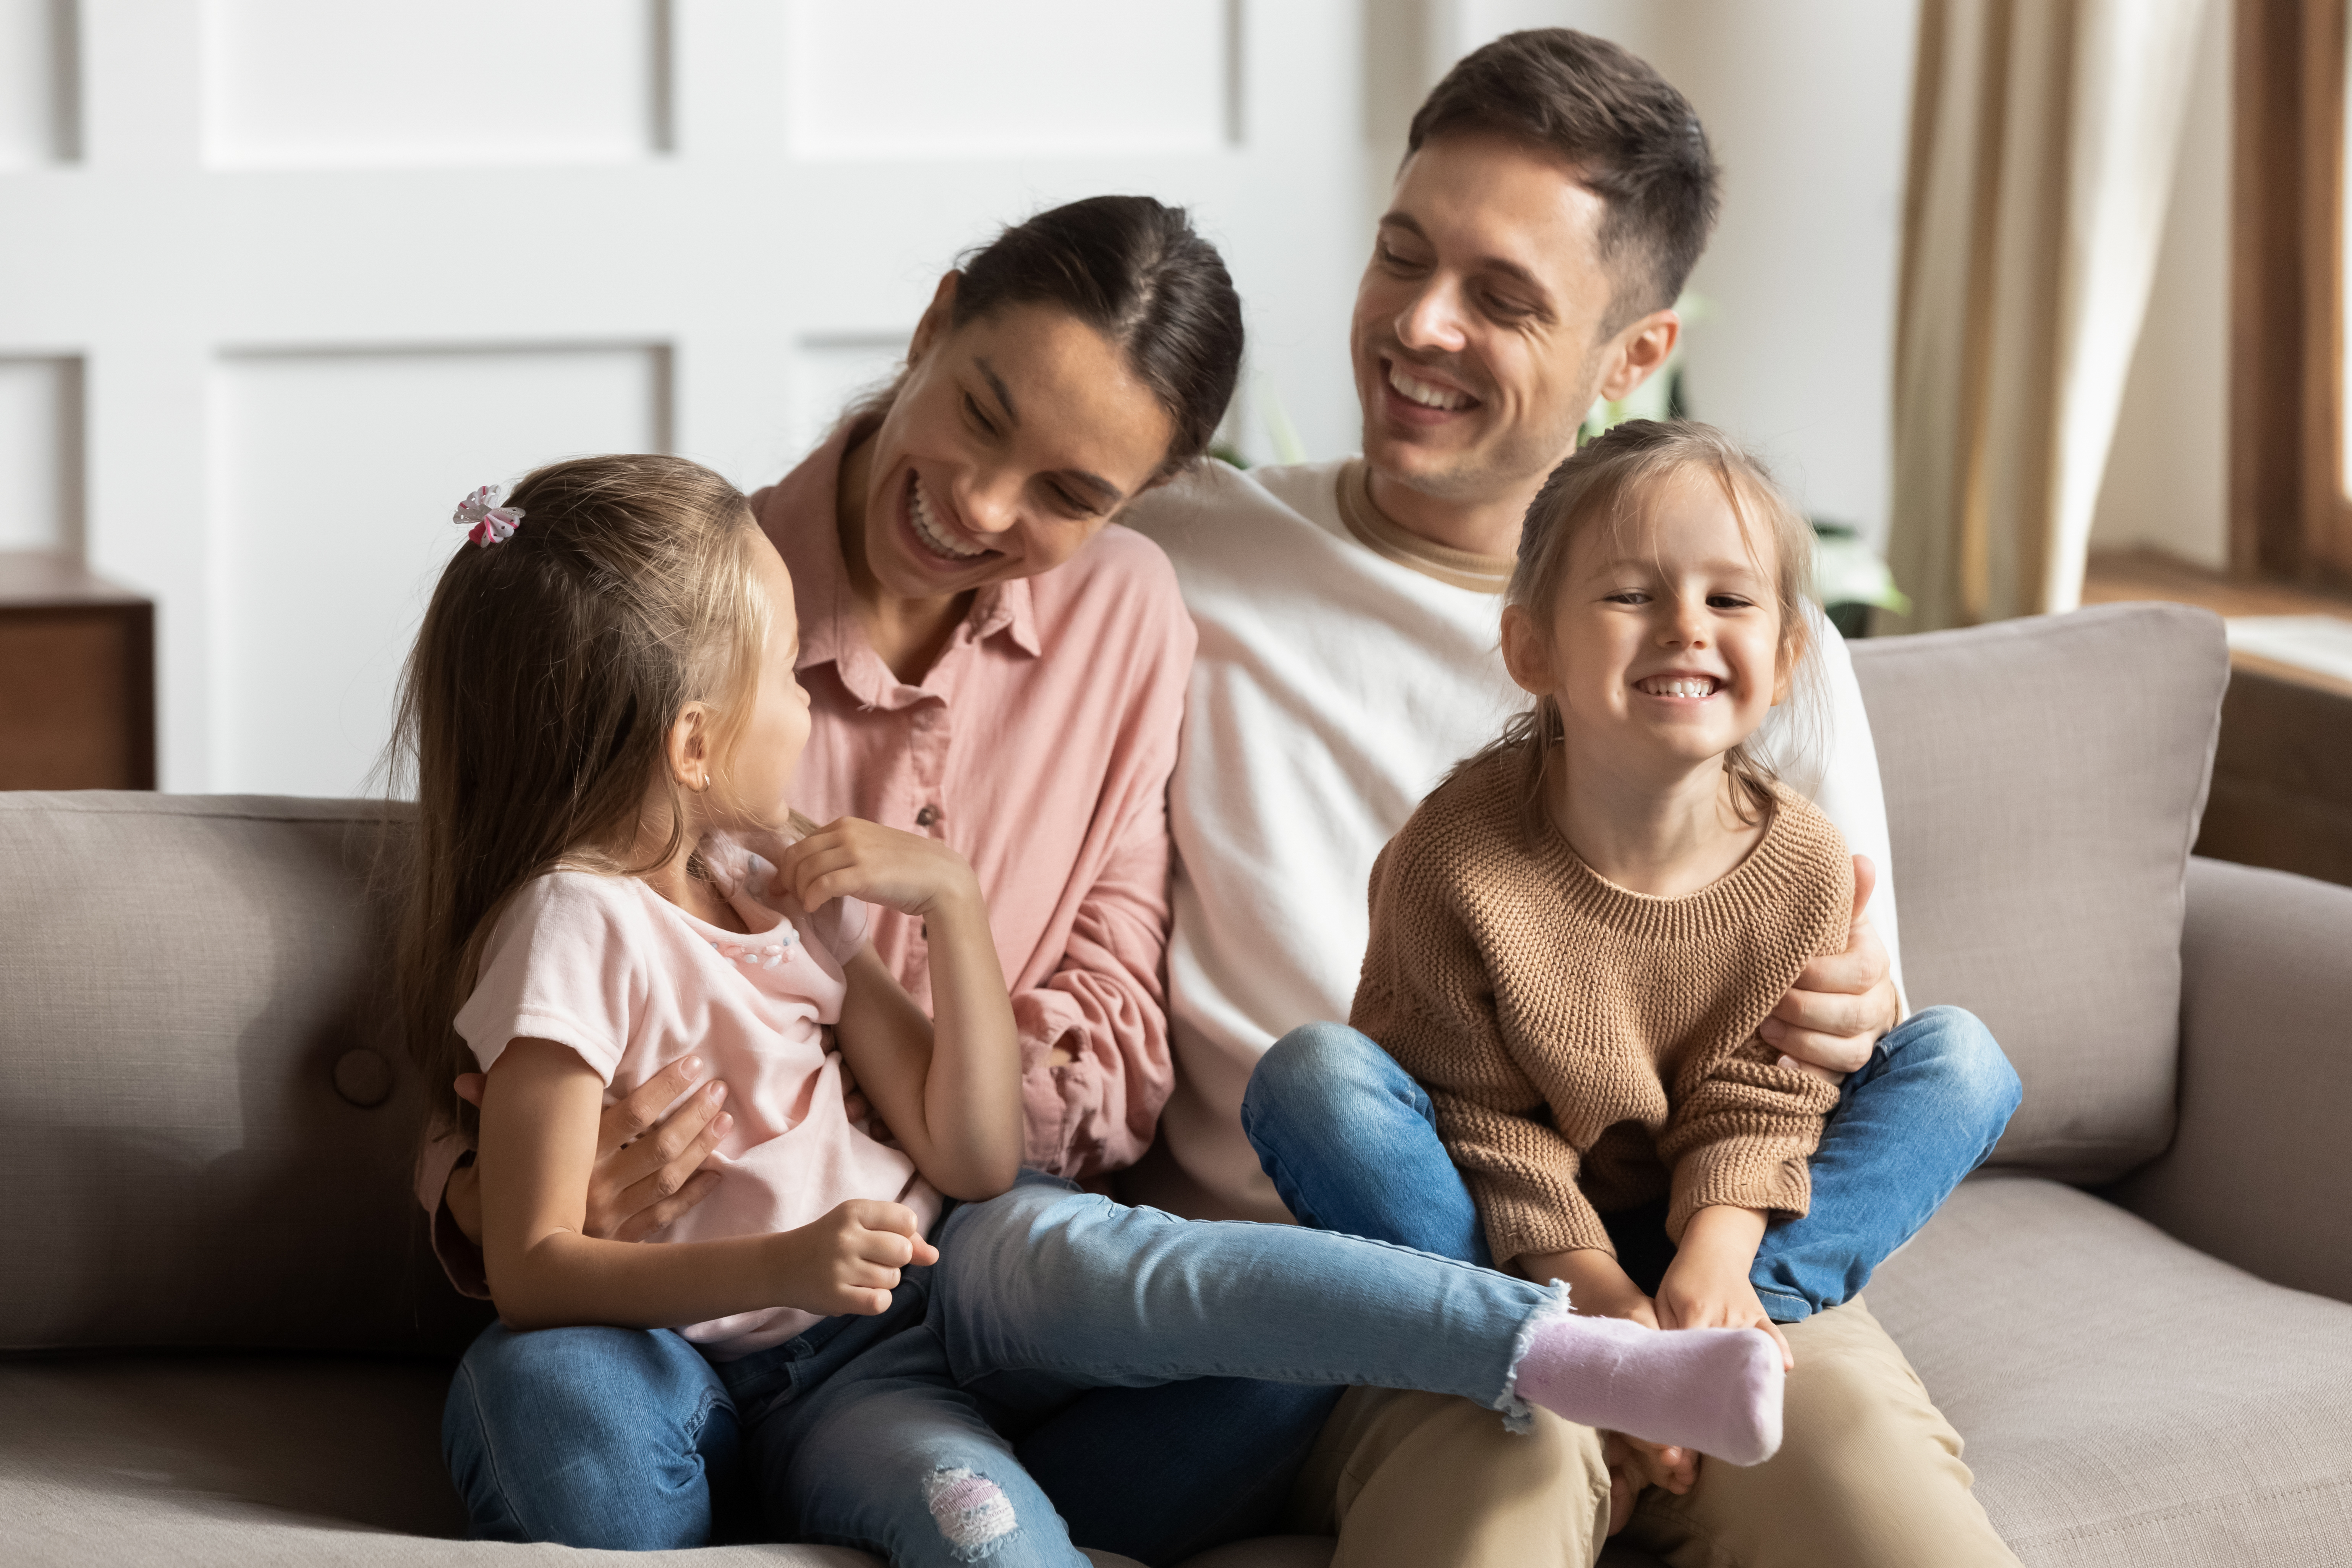 Smiling parents having a sweet family moment with their daughters | Source: Shutterstock